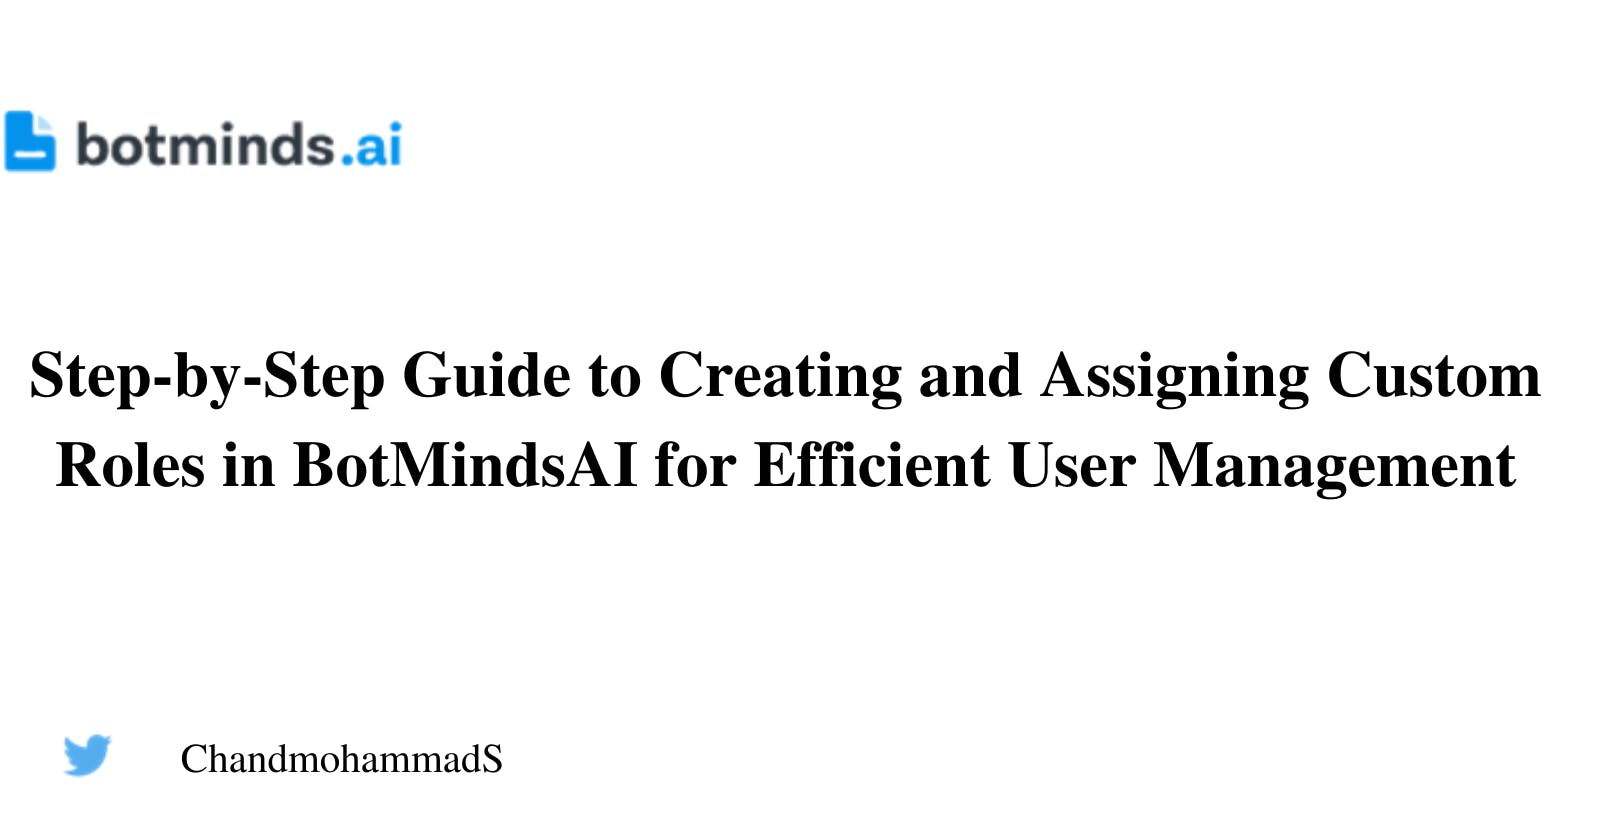 Step-by-Step Guide to Creating and Assigning Custom Roles in BotMindsAI for Efficient User Management